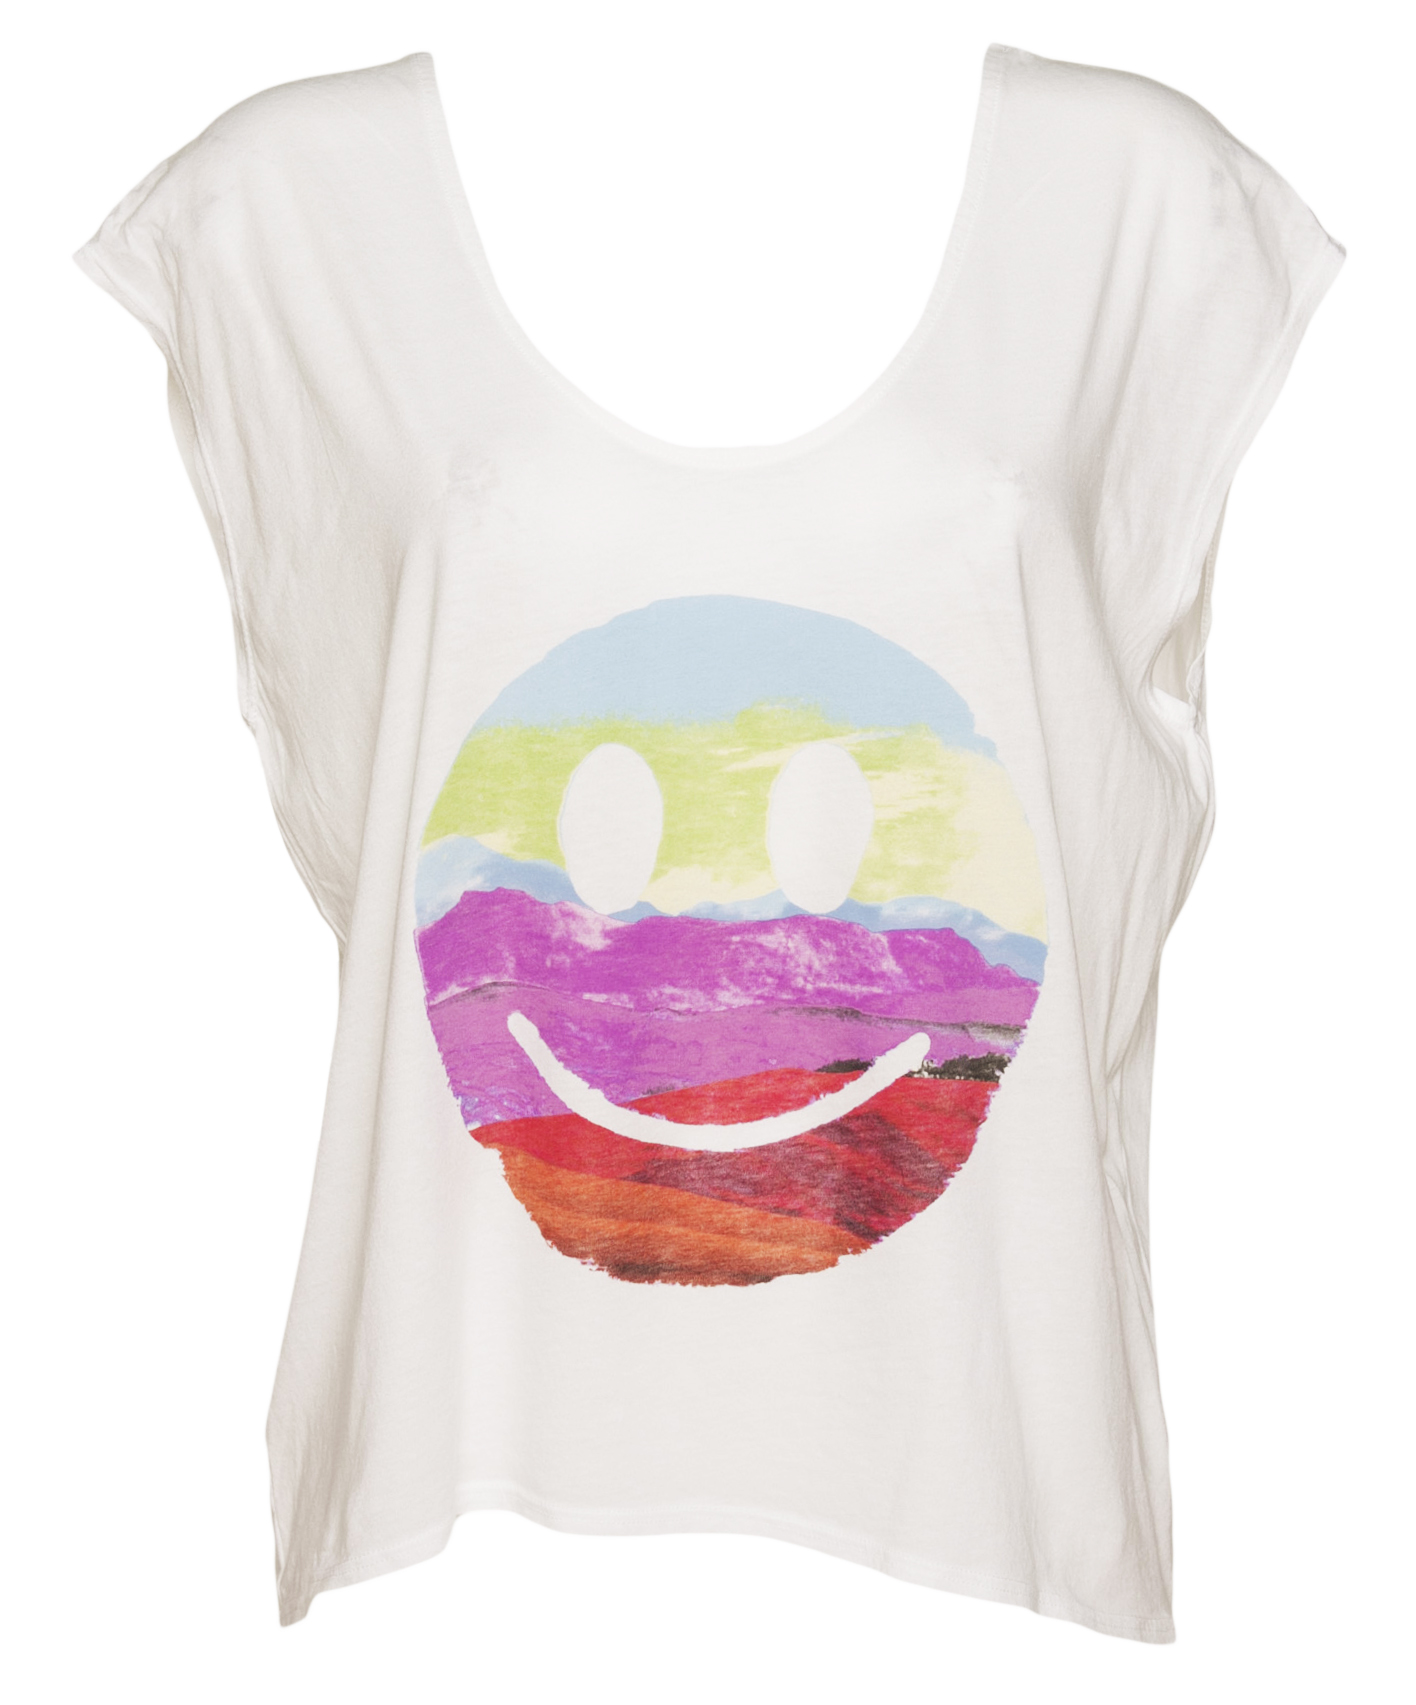 Ladies White Happy Face Scene Scoop Neck Slouch T-Shirt from Junk Food £26.99